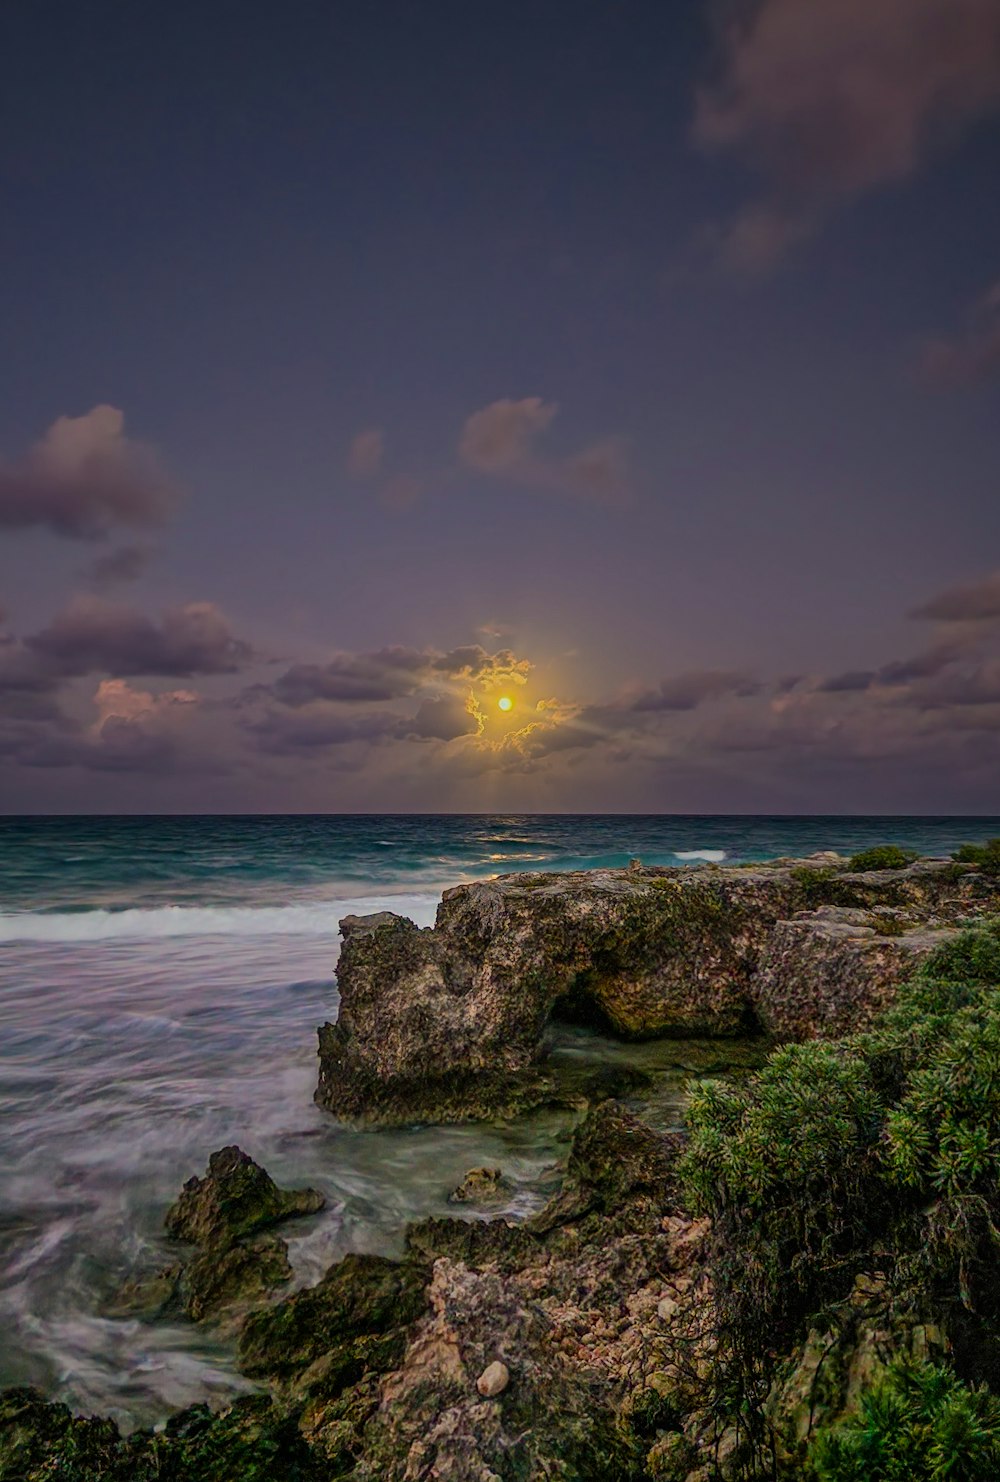 a full moon setting over the ocean and rocks